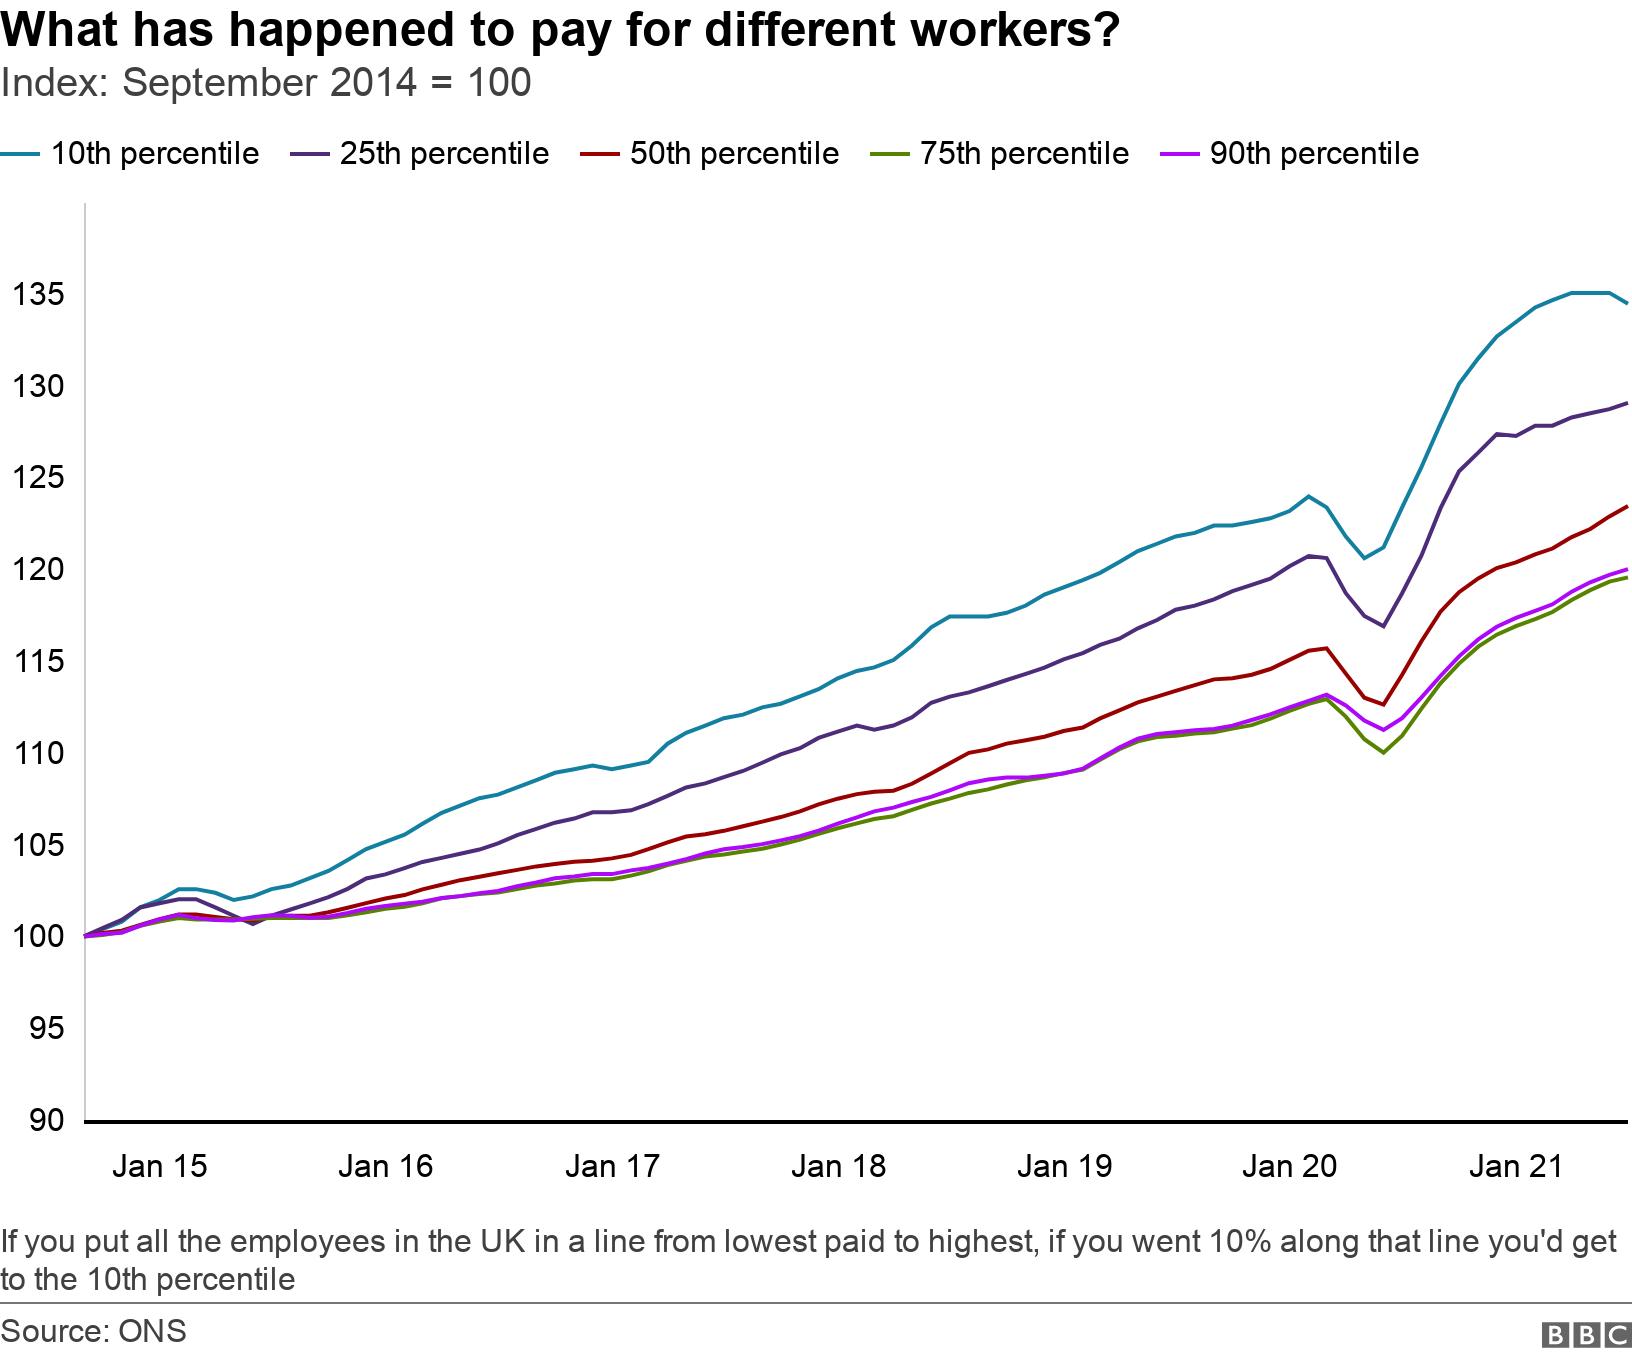 What has happened to pay for different workers?. Index: September 2014 = 100. If you put all the employees in the UK in a line from lowest paid to highest, if you went 10% along that line you'd get to the 10th percentile.